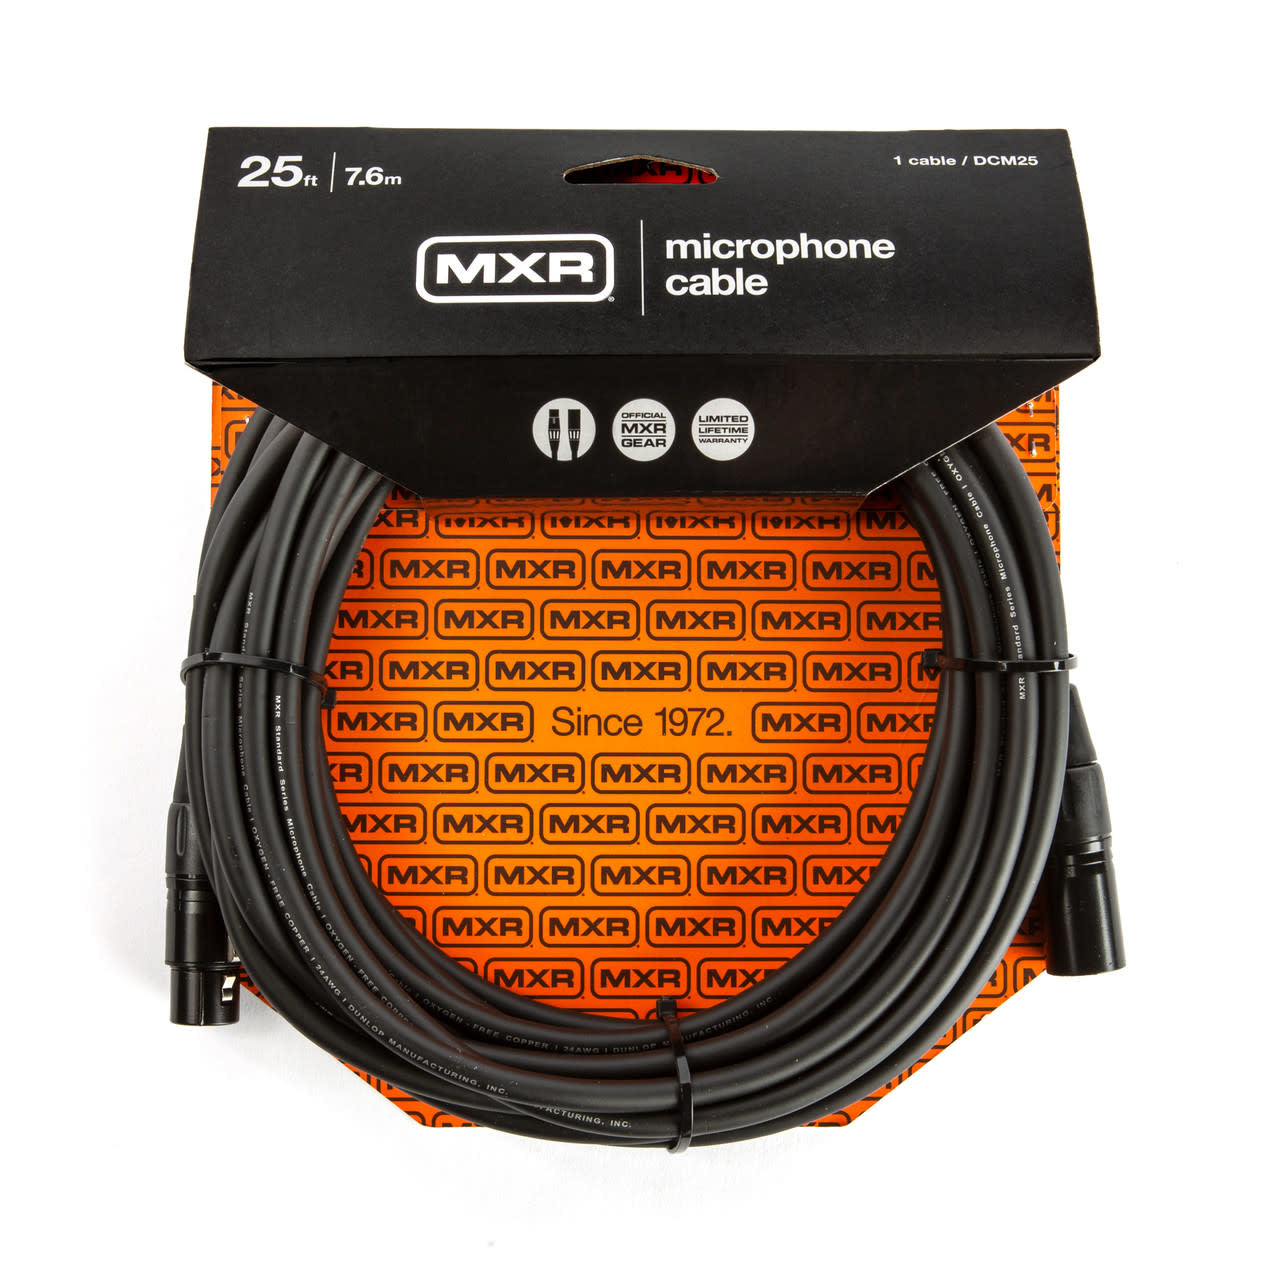 MXR 25 Ft Microphone Cable